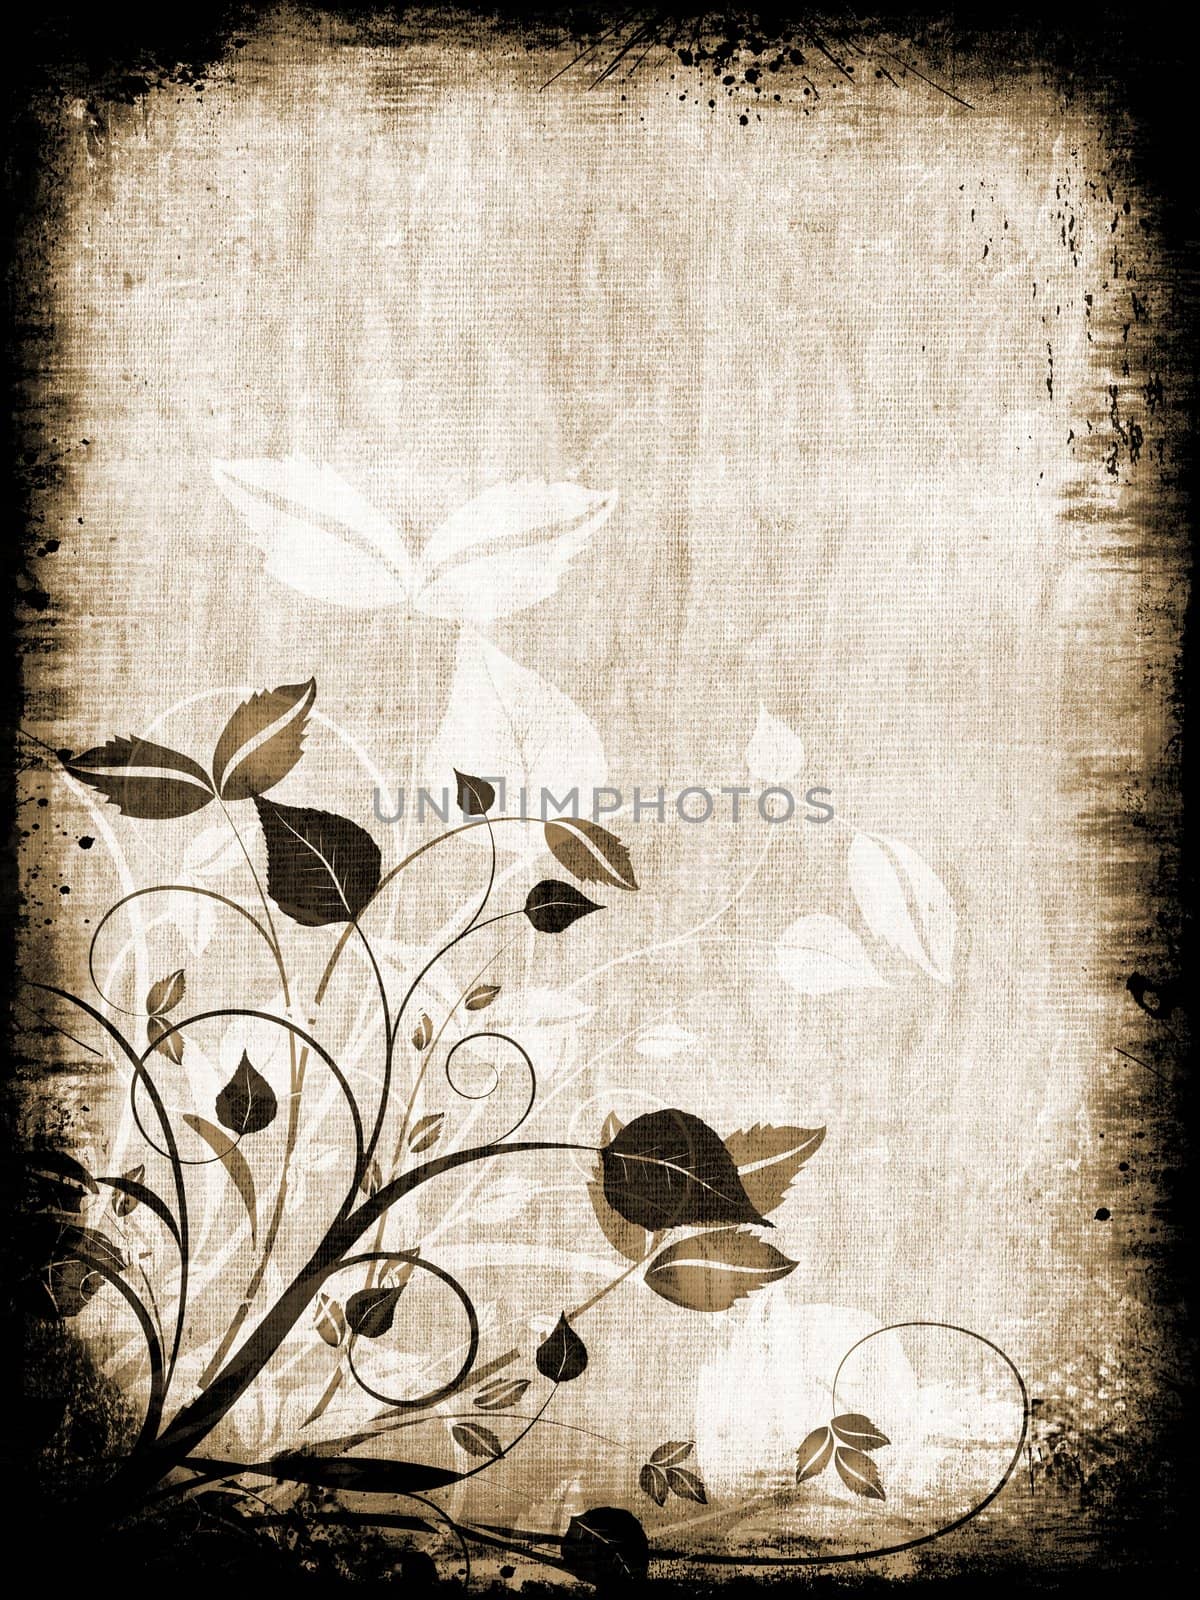 Abstract floral design on grunge background